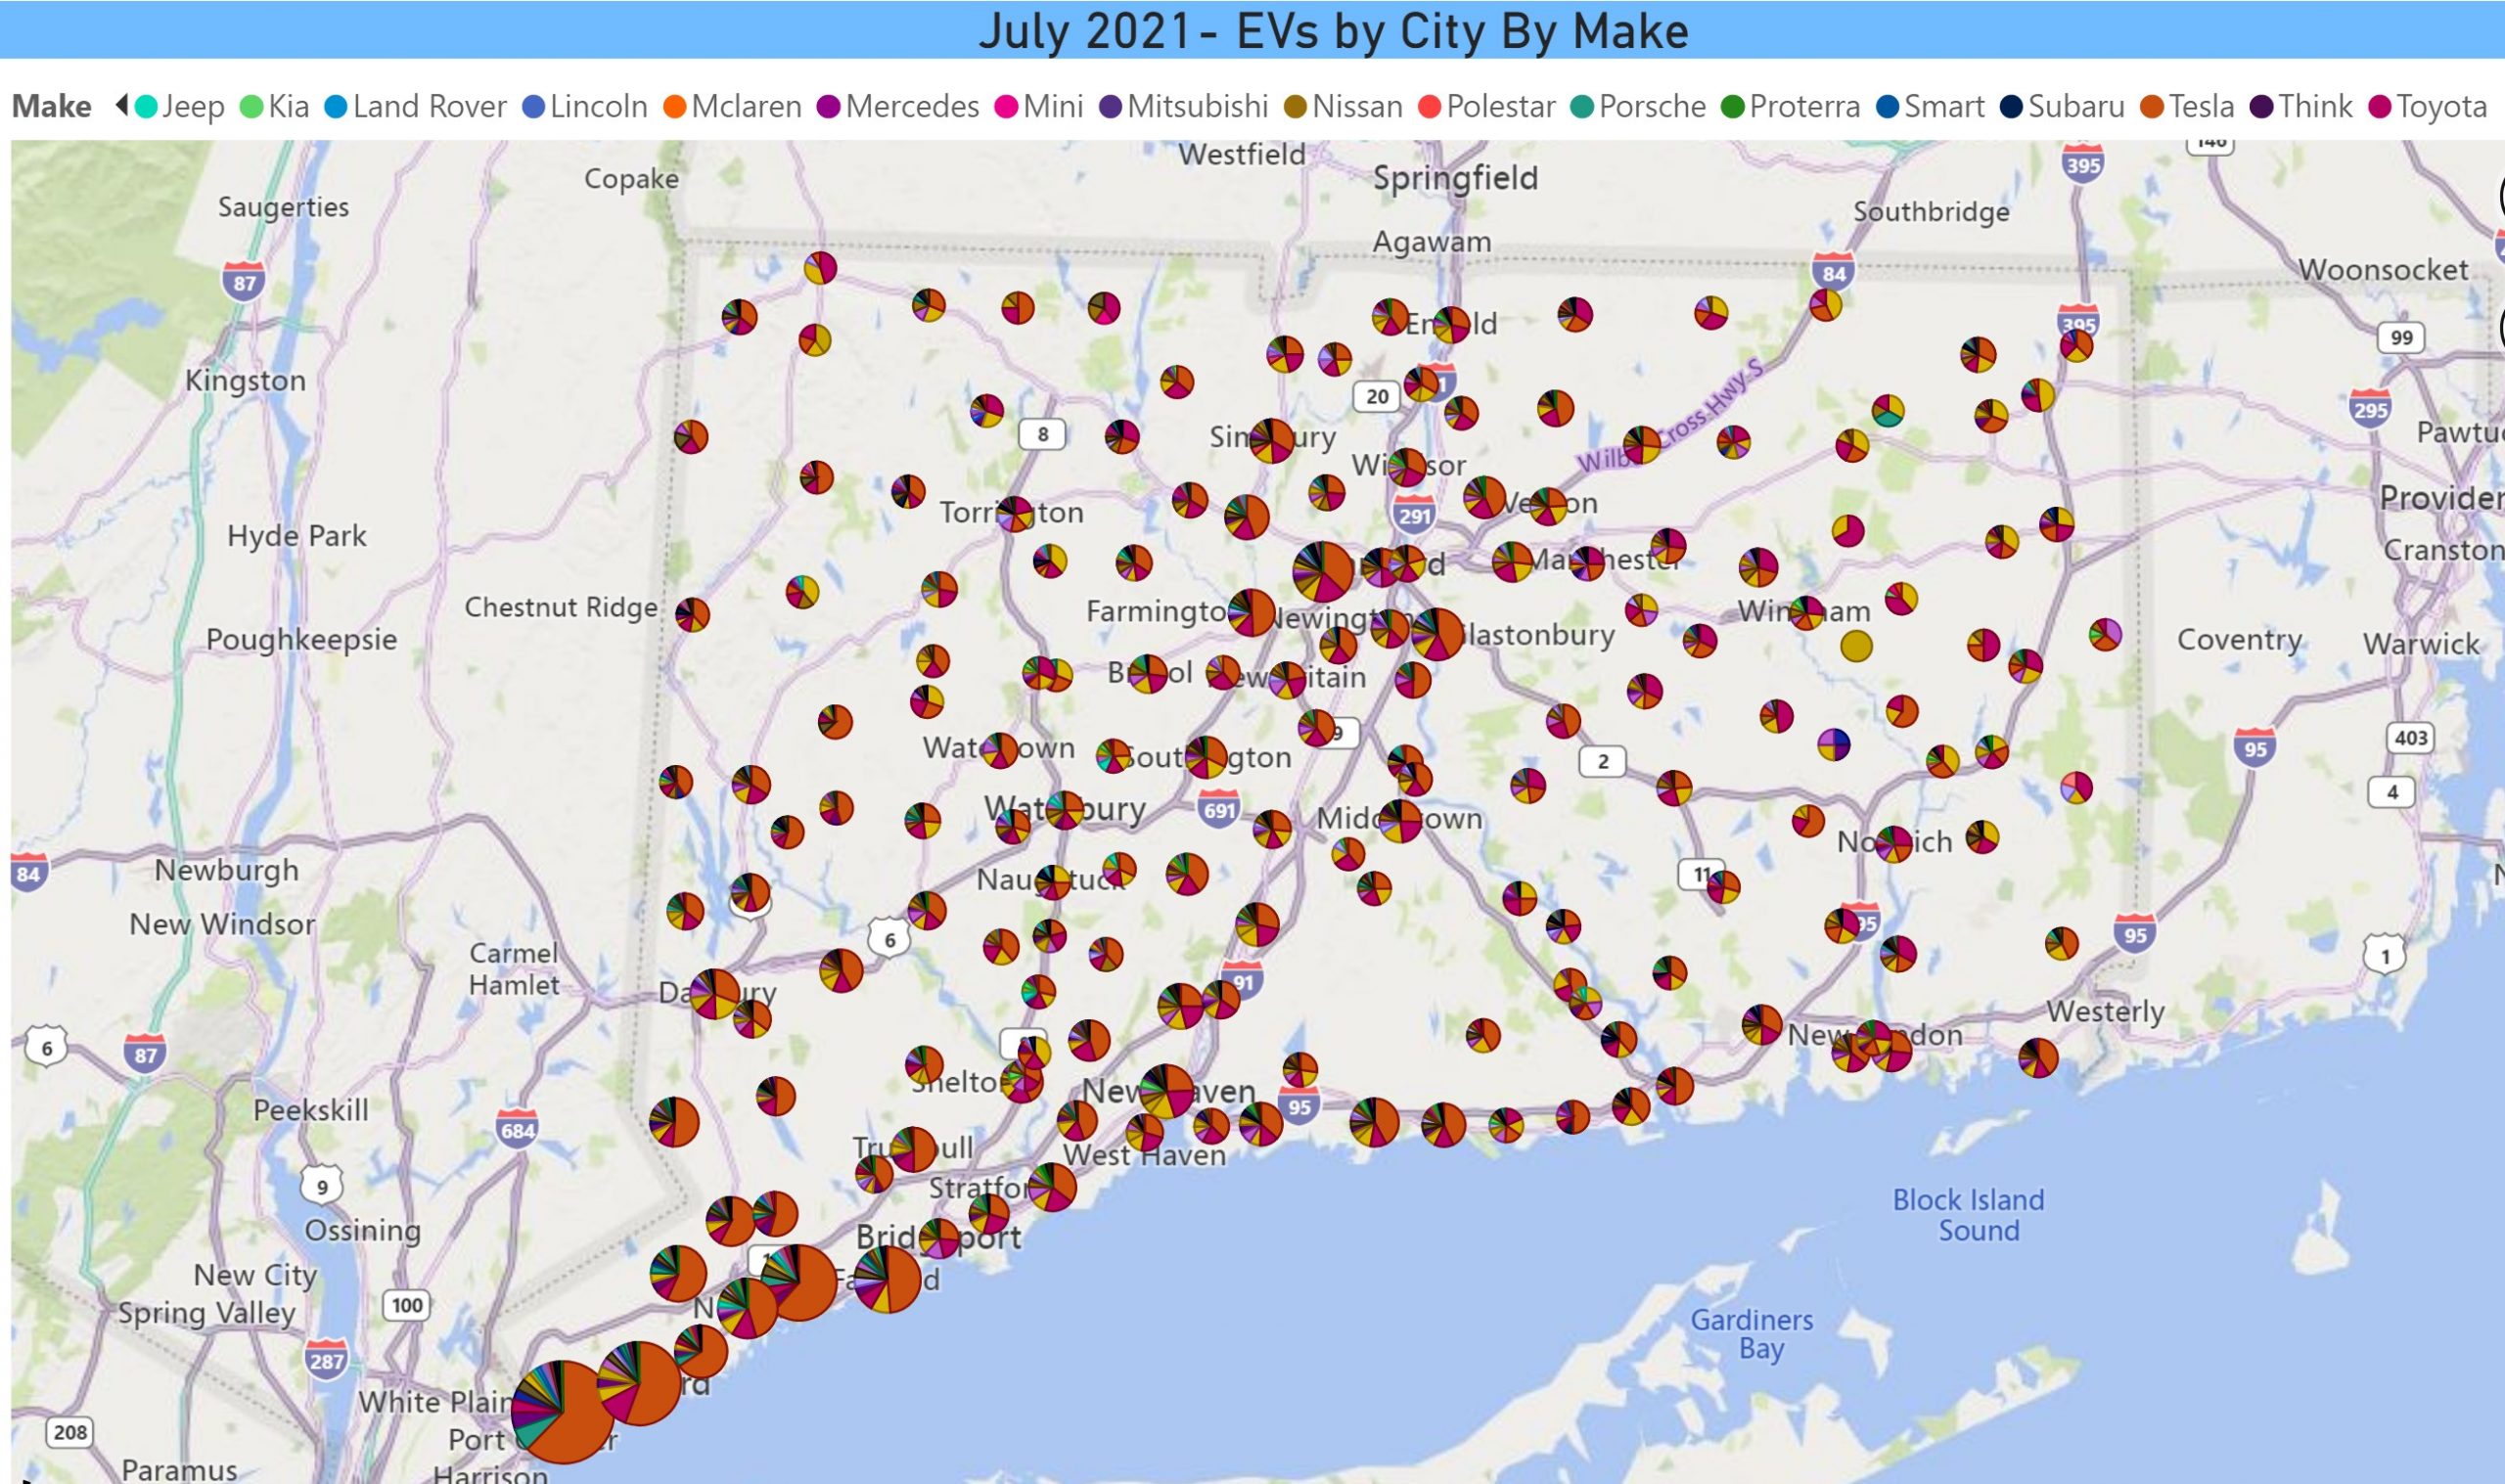 Map of EVs by City by Make July '21